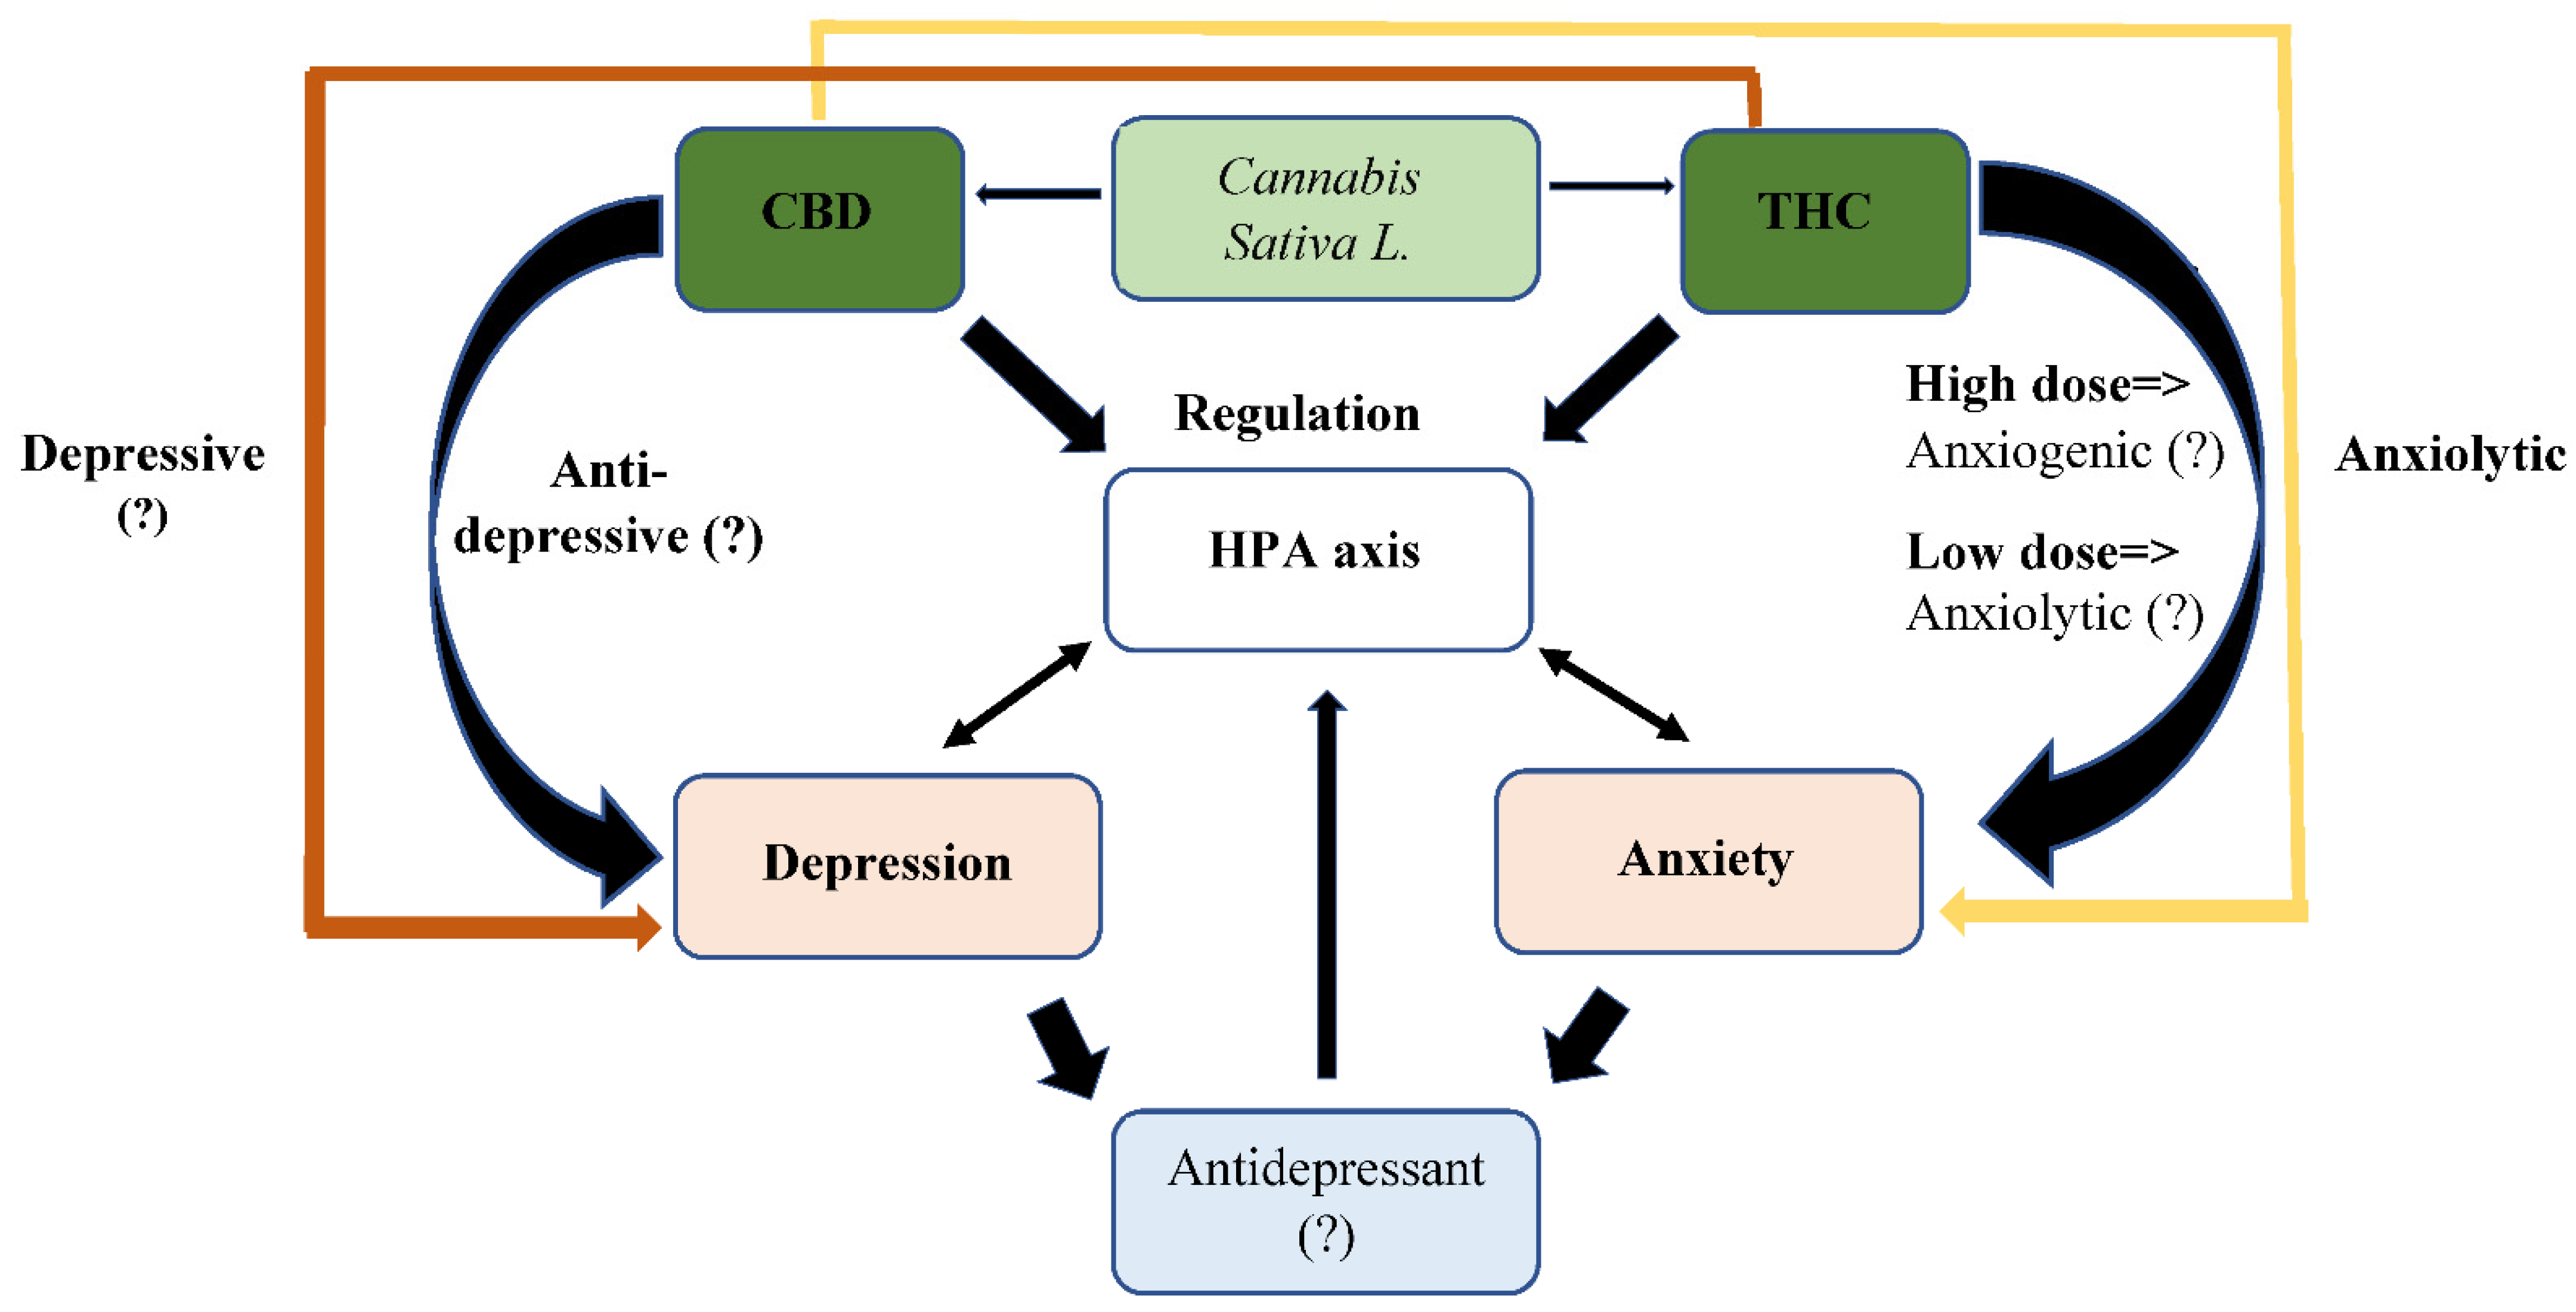 IJERPH | Free Full-Text | Examining the Use of Antidepressants for  Adolescents with Depression/Anxiety Who Regularly Use Cannabis: A Narrative  Review | HTML